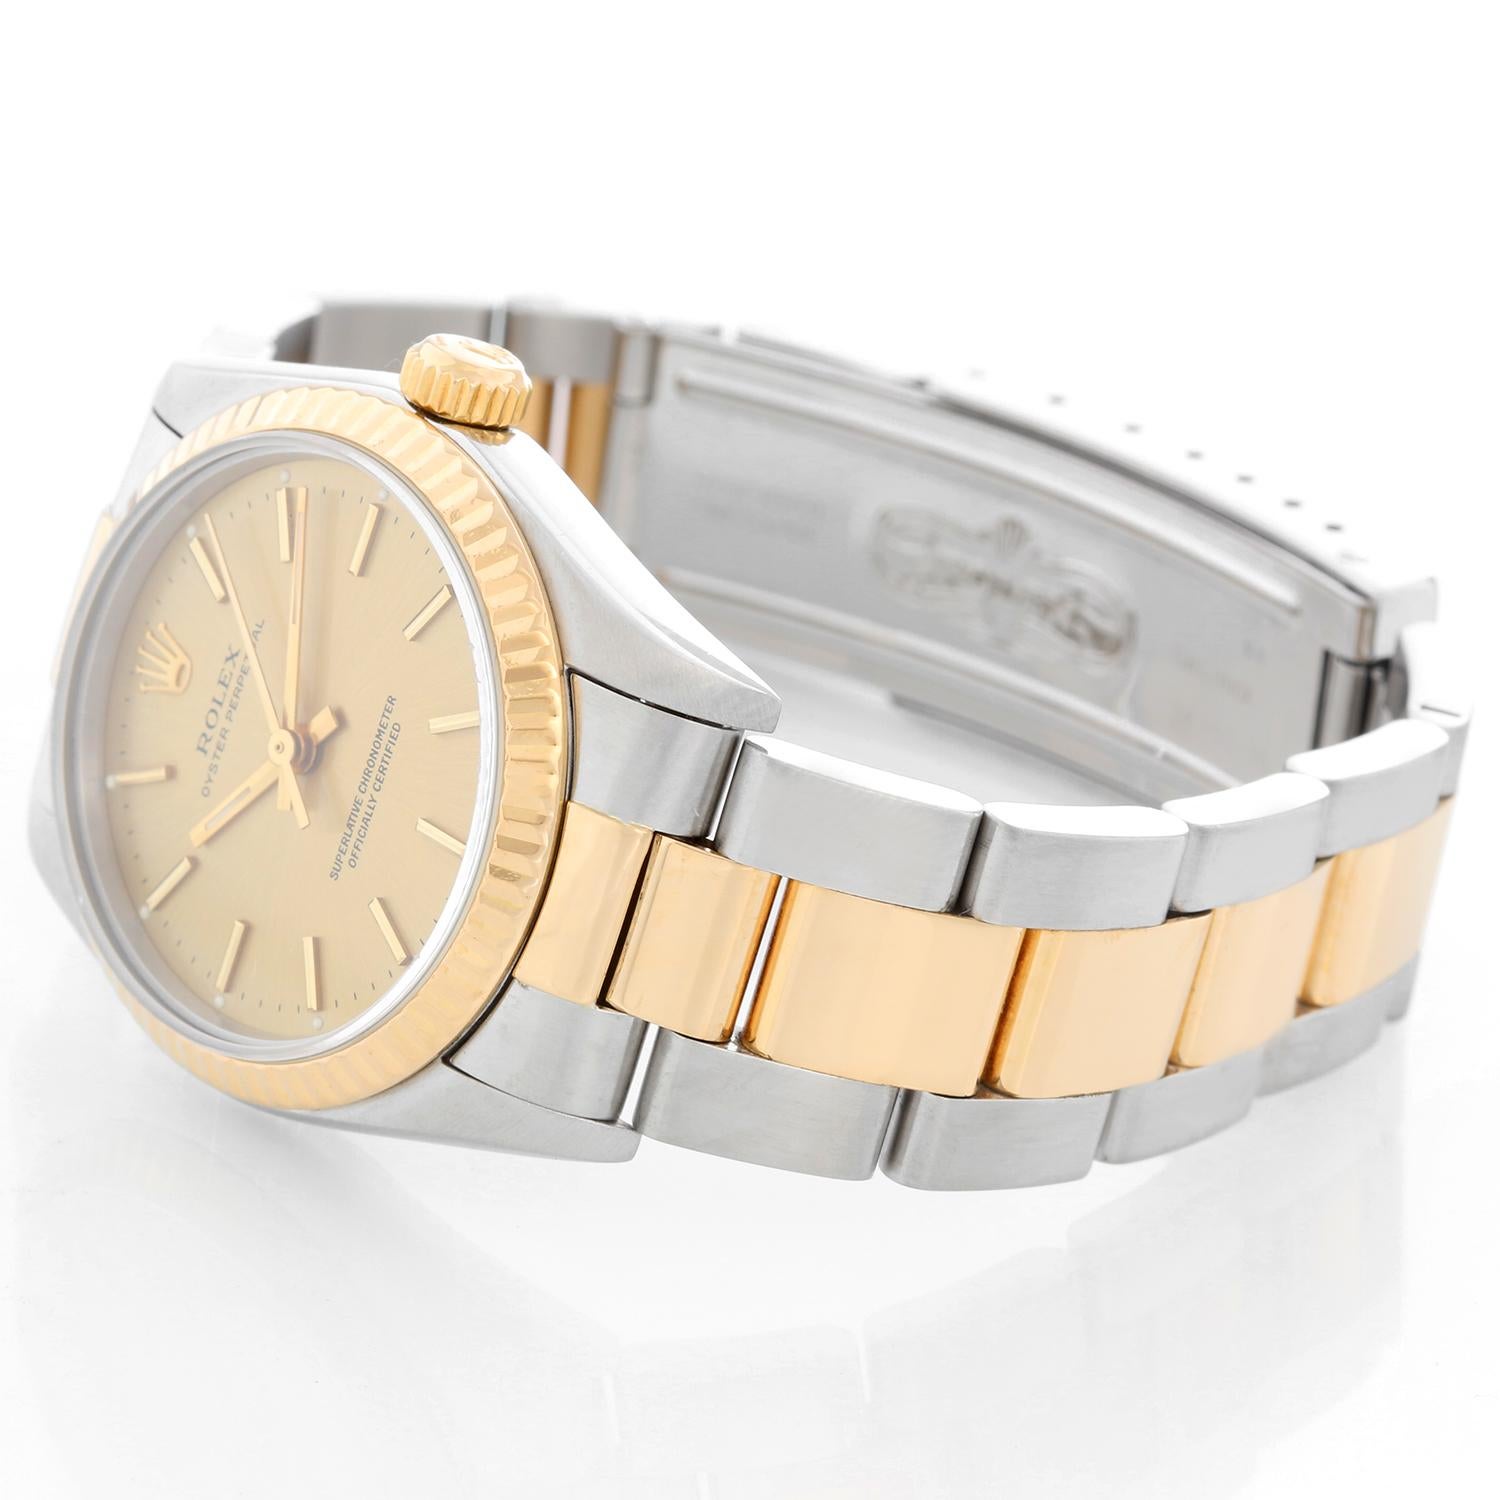 Rolex Midsize Steel & Gold 2 Tone Datejust 67513 - Automatic winding. Stainless steel case with 18k gold fluted bezel (30mm diameter). Champagne dial with stick hour markers . Stainless steel and 18k yellow gold Oyster bracelet. Pre-owned with